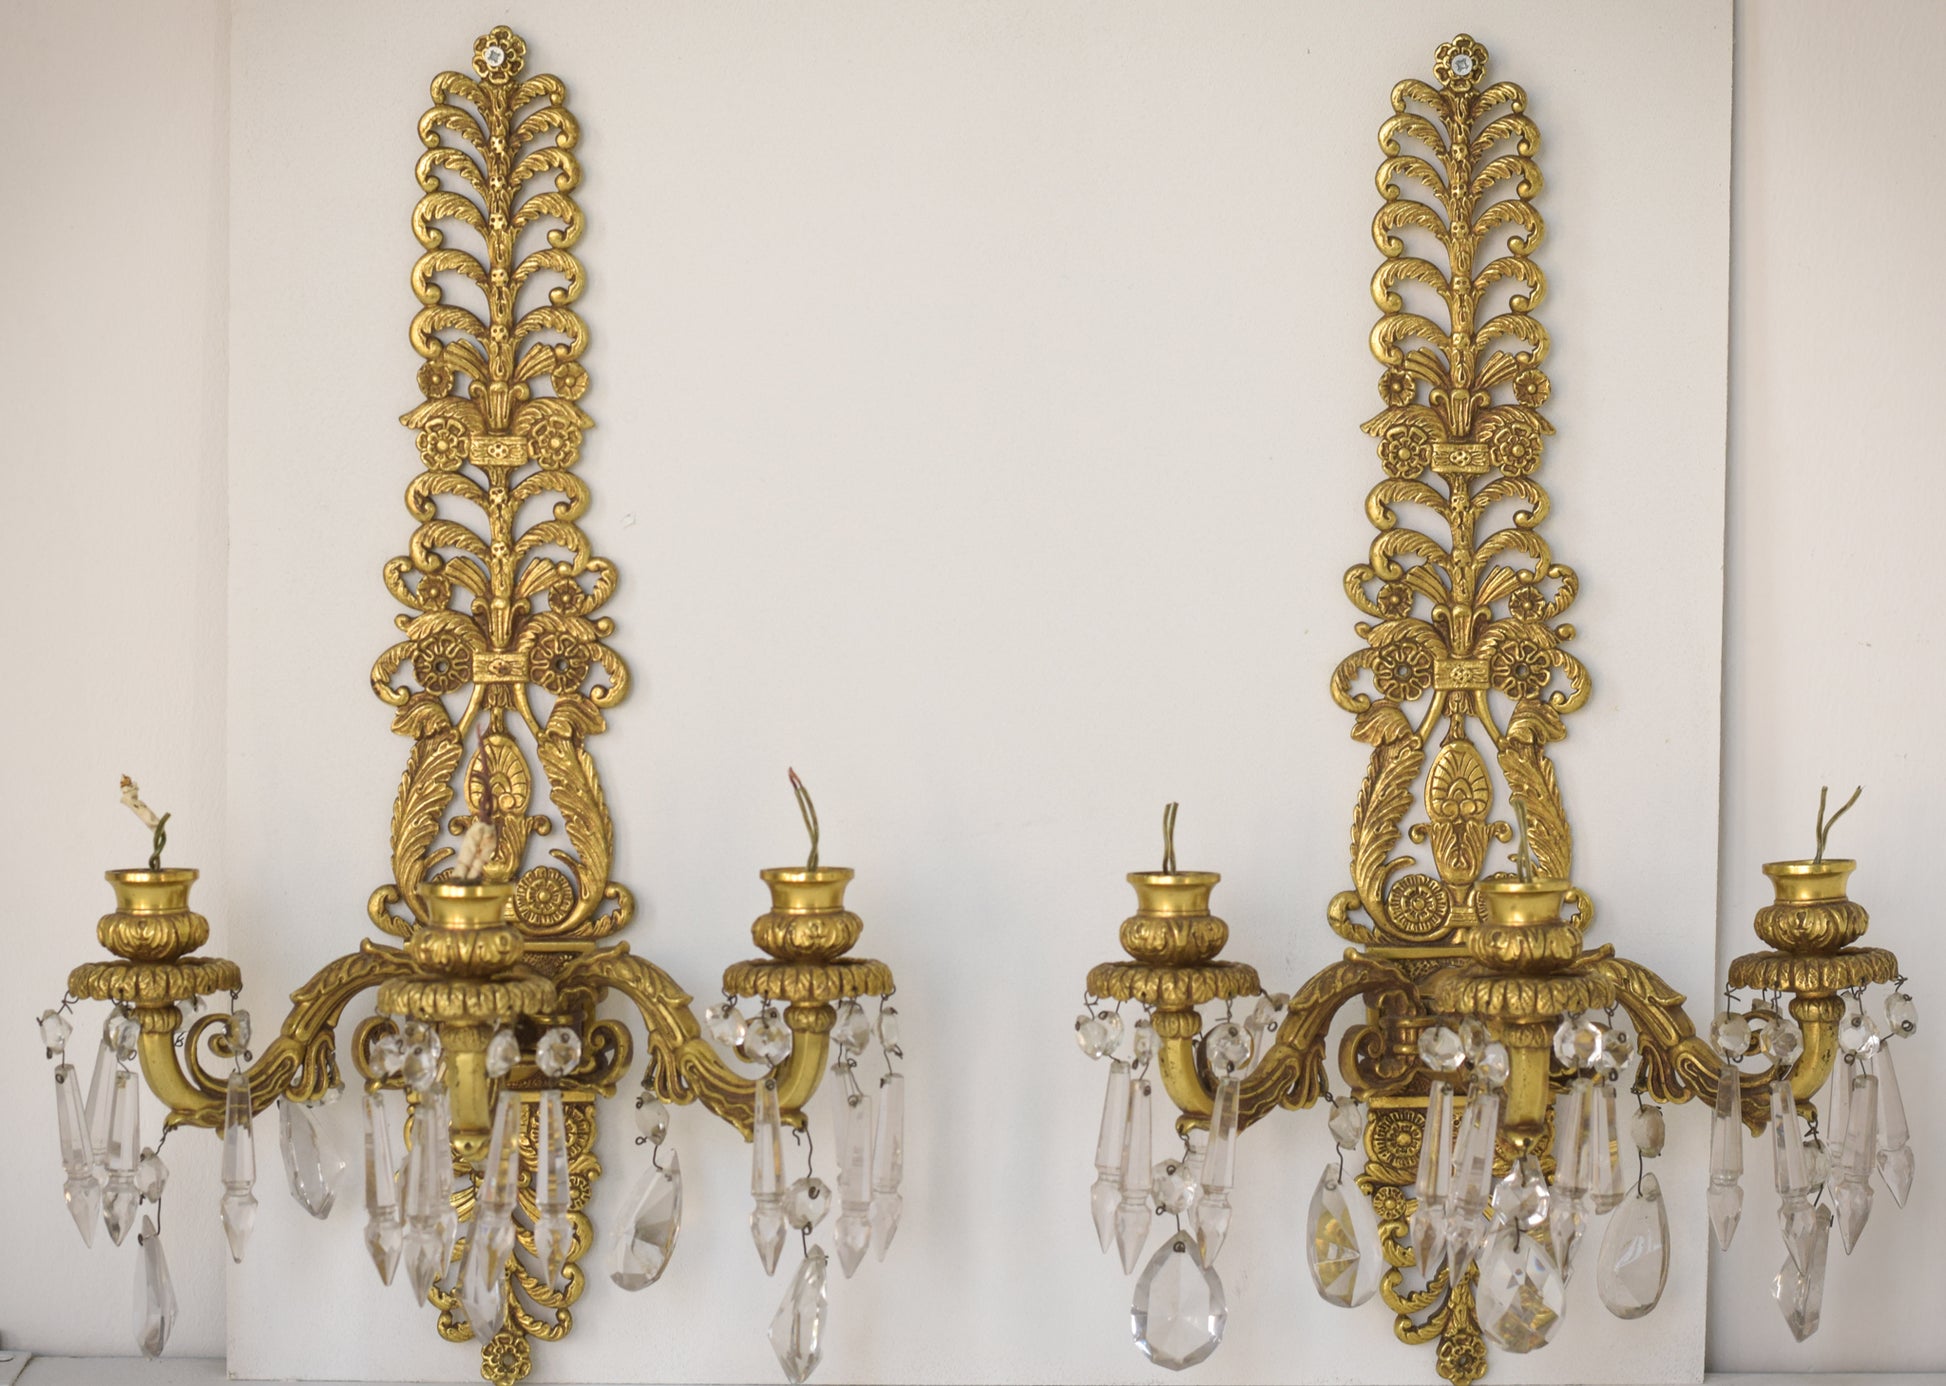 Two Golden Wall-Mounted Chandeliers